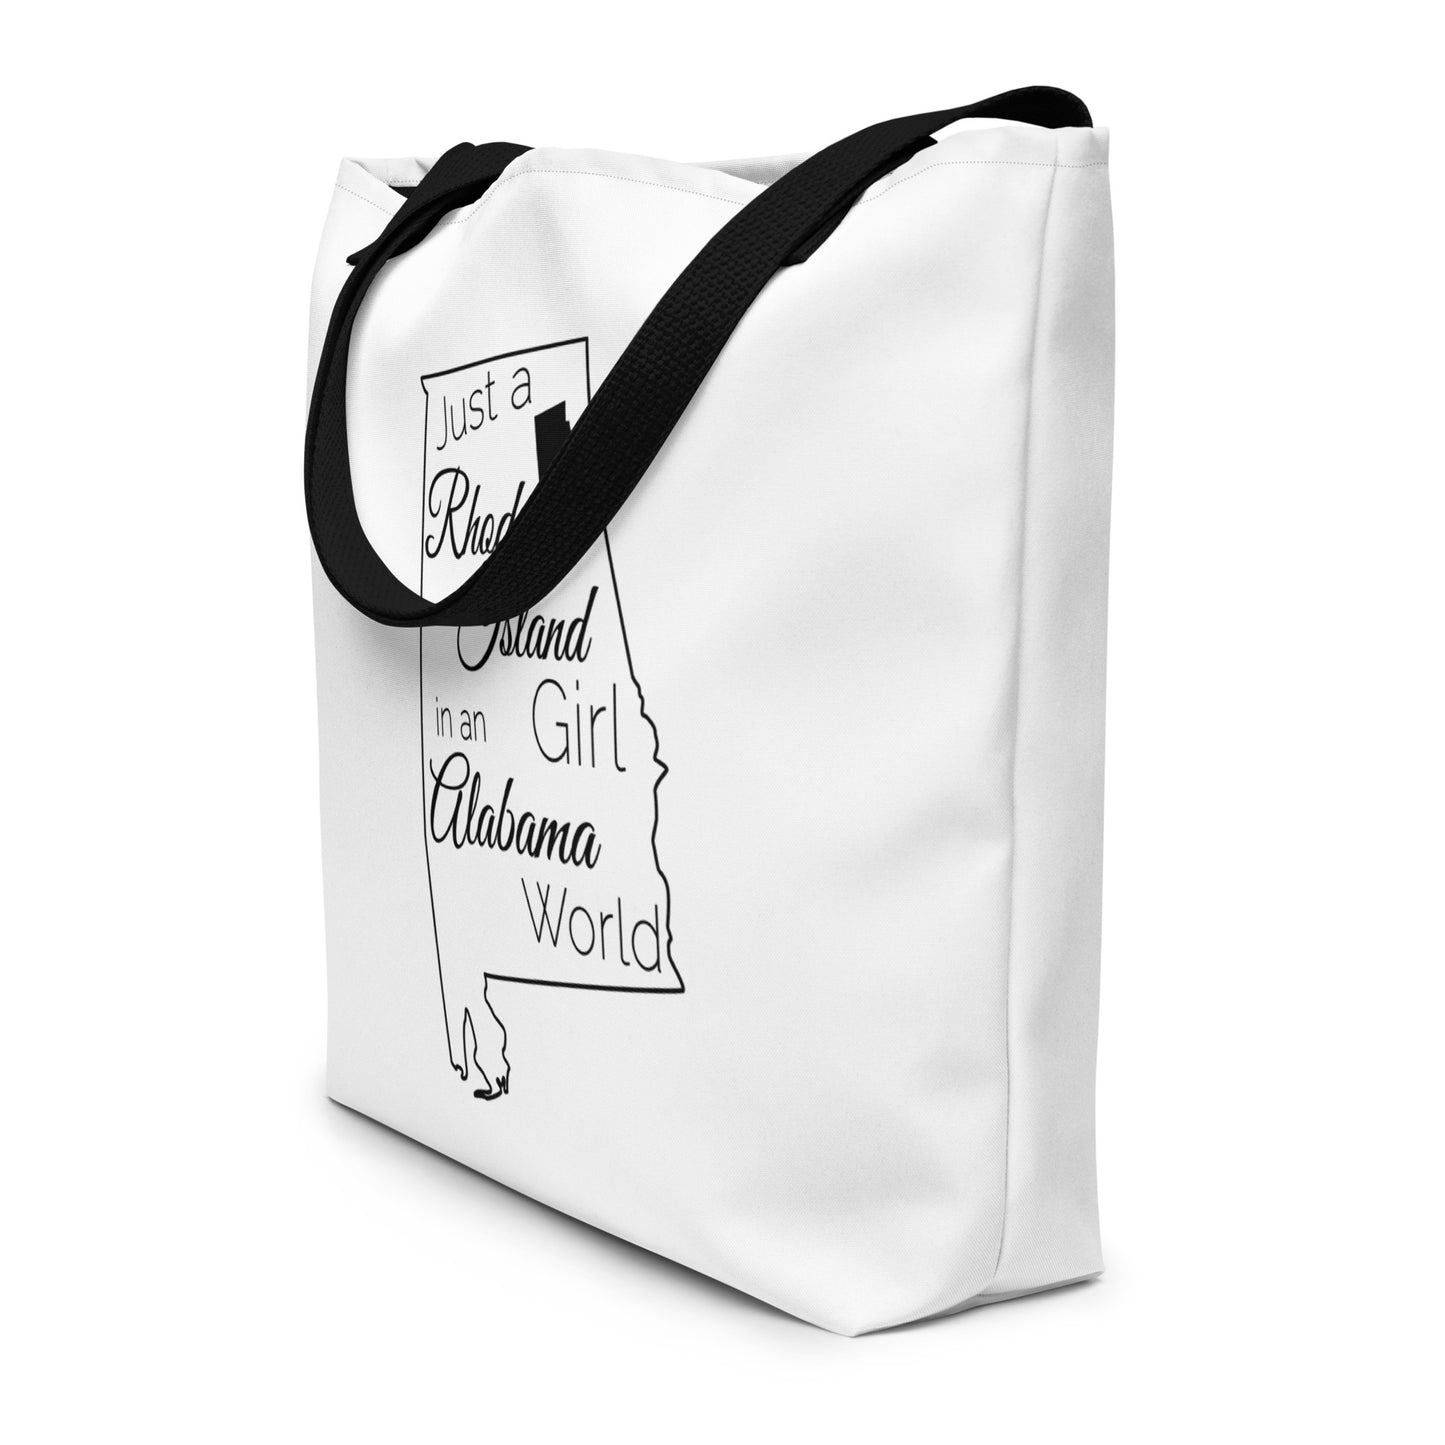 Just a Rhode Island Girl in an Alabama World Large Tote Bag